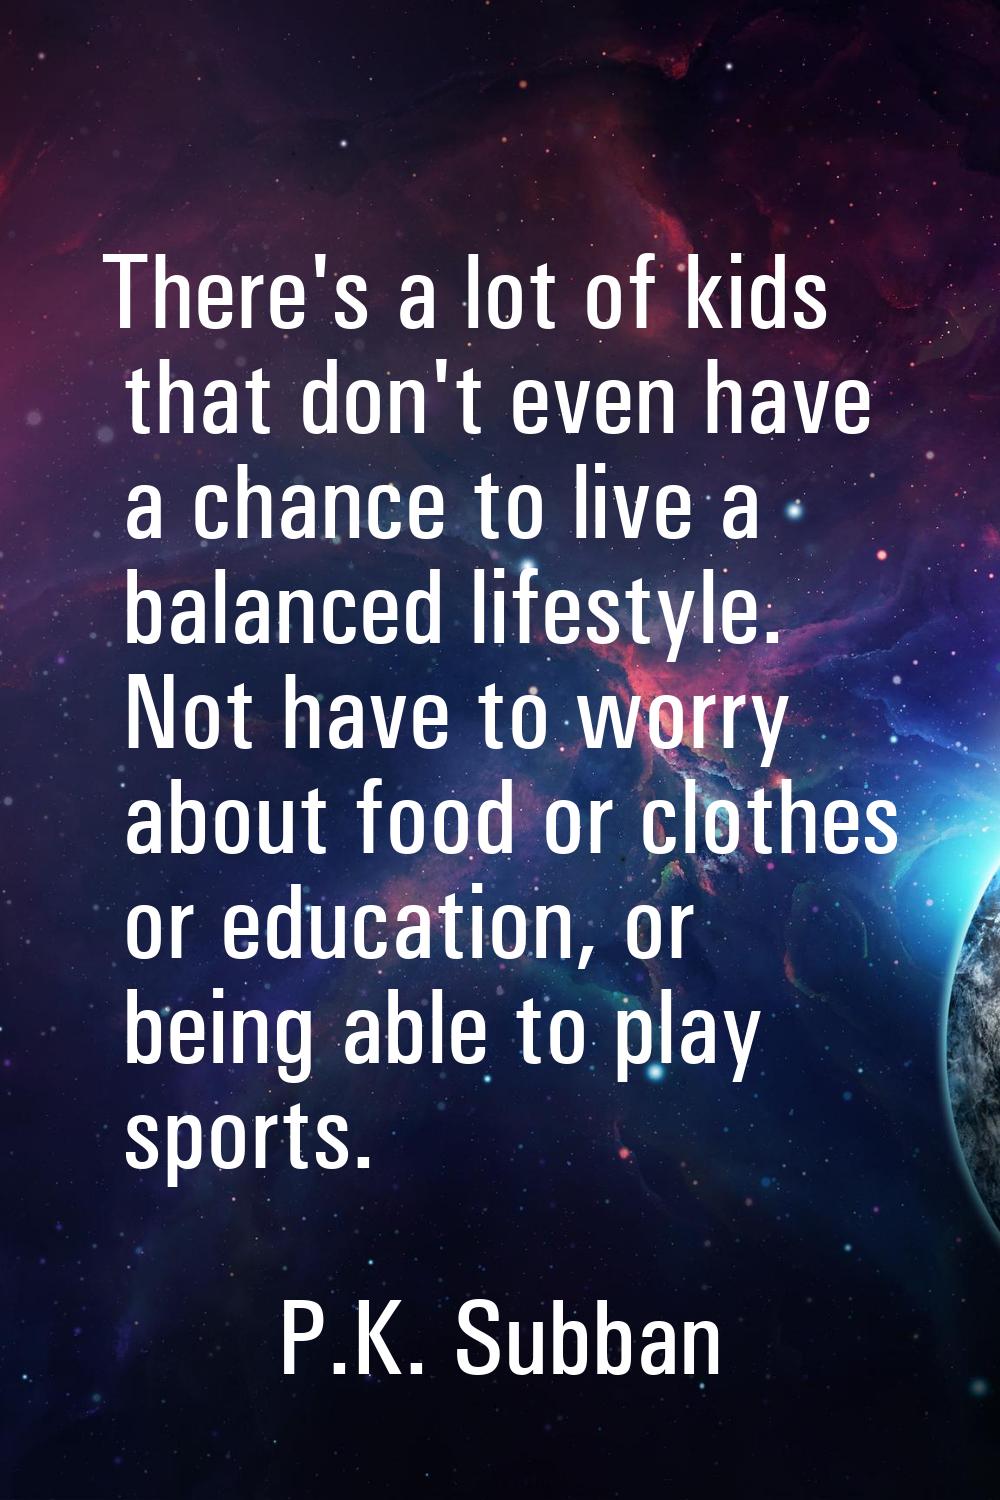 There's a lot of kids that don't even have a chance to live a balanced lifestyle. Not have to worry